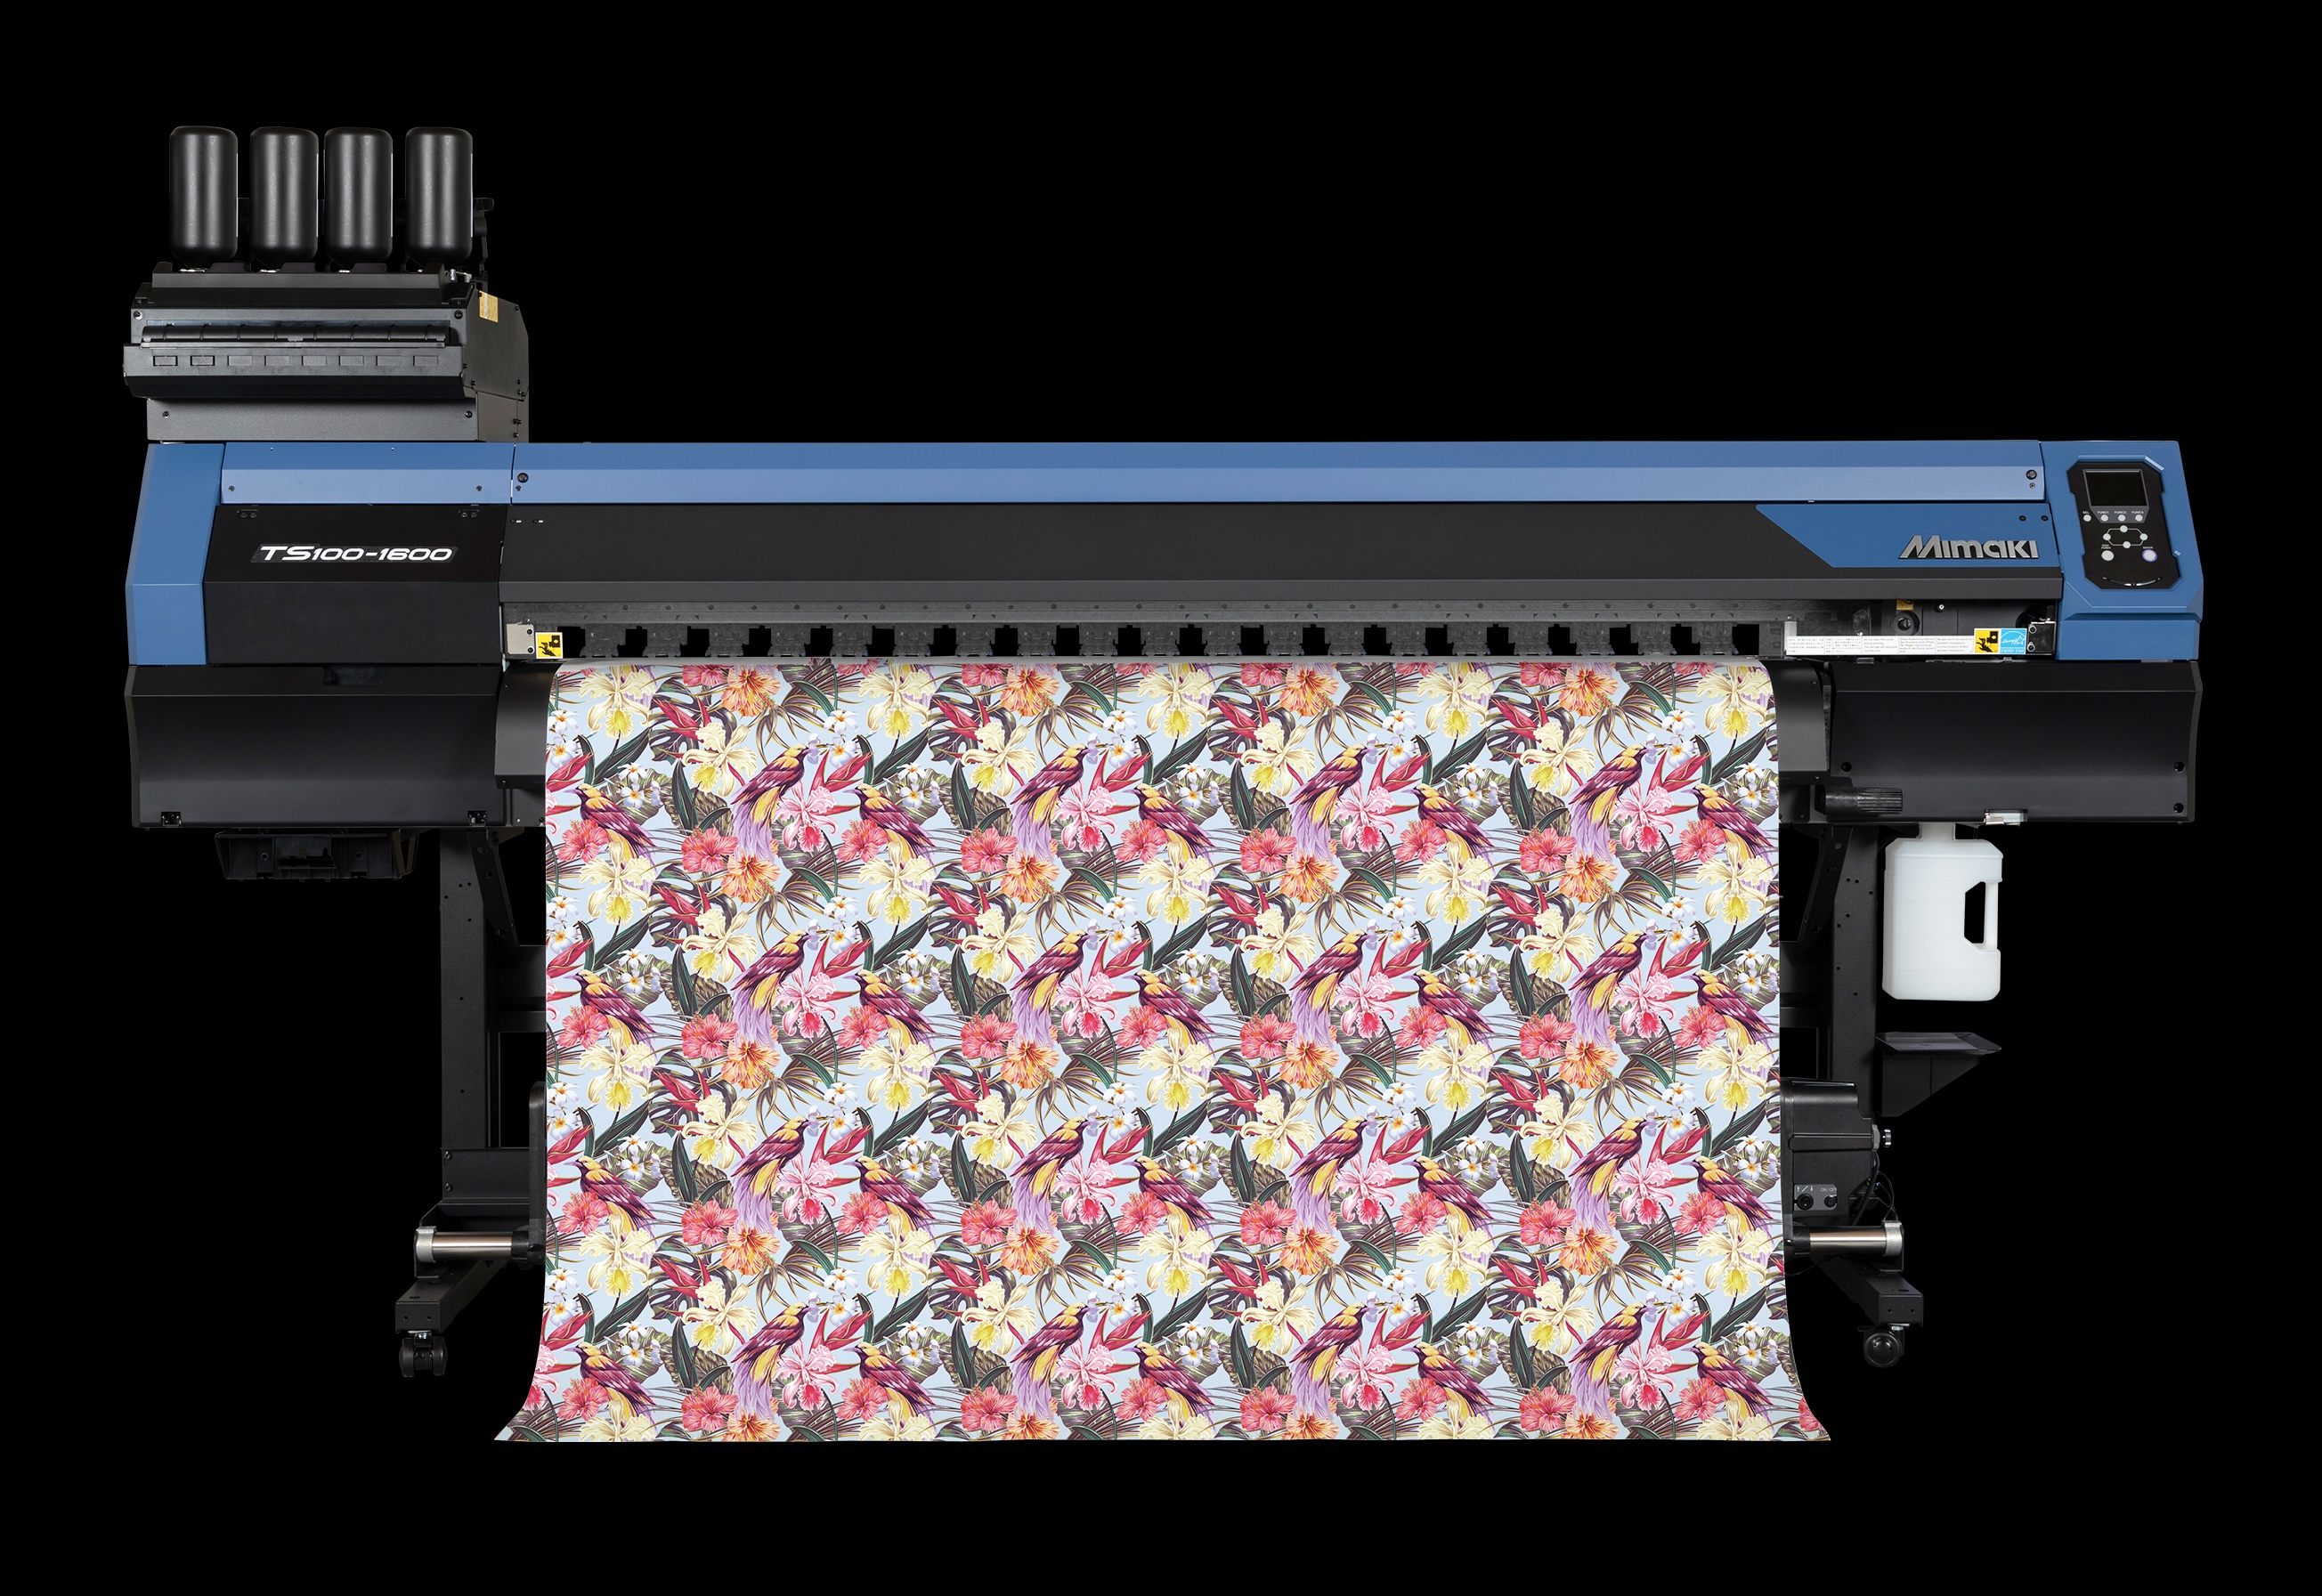 Caption: Mimaki recently launched its new TS100-1600 as an entry-level option. Credit: Mimaki